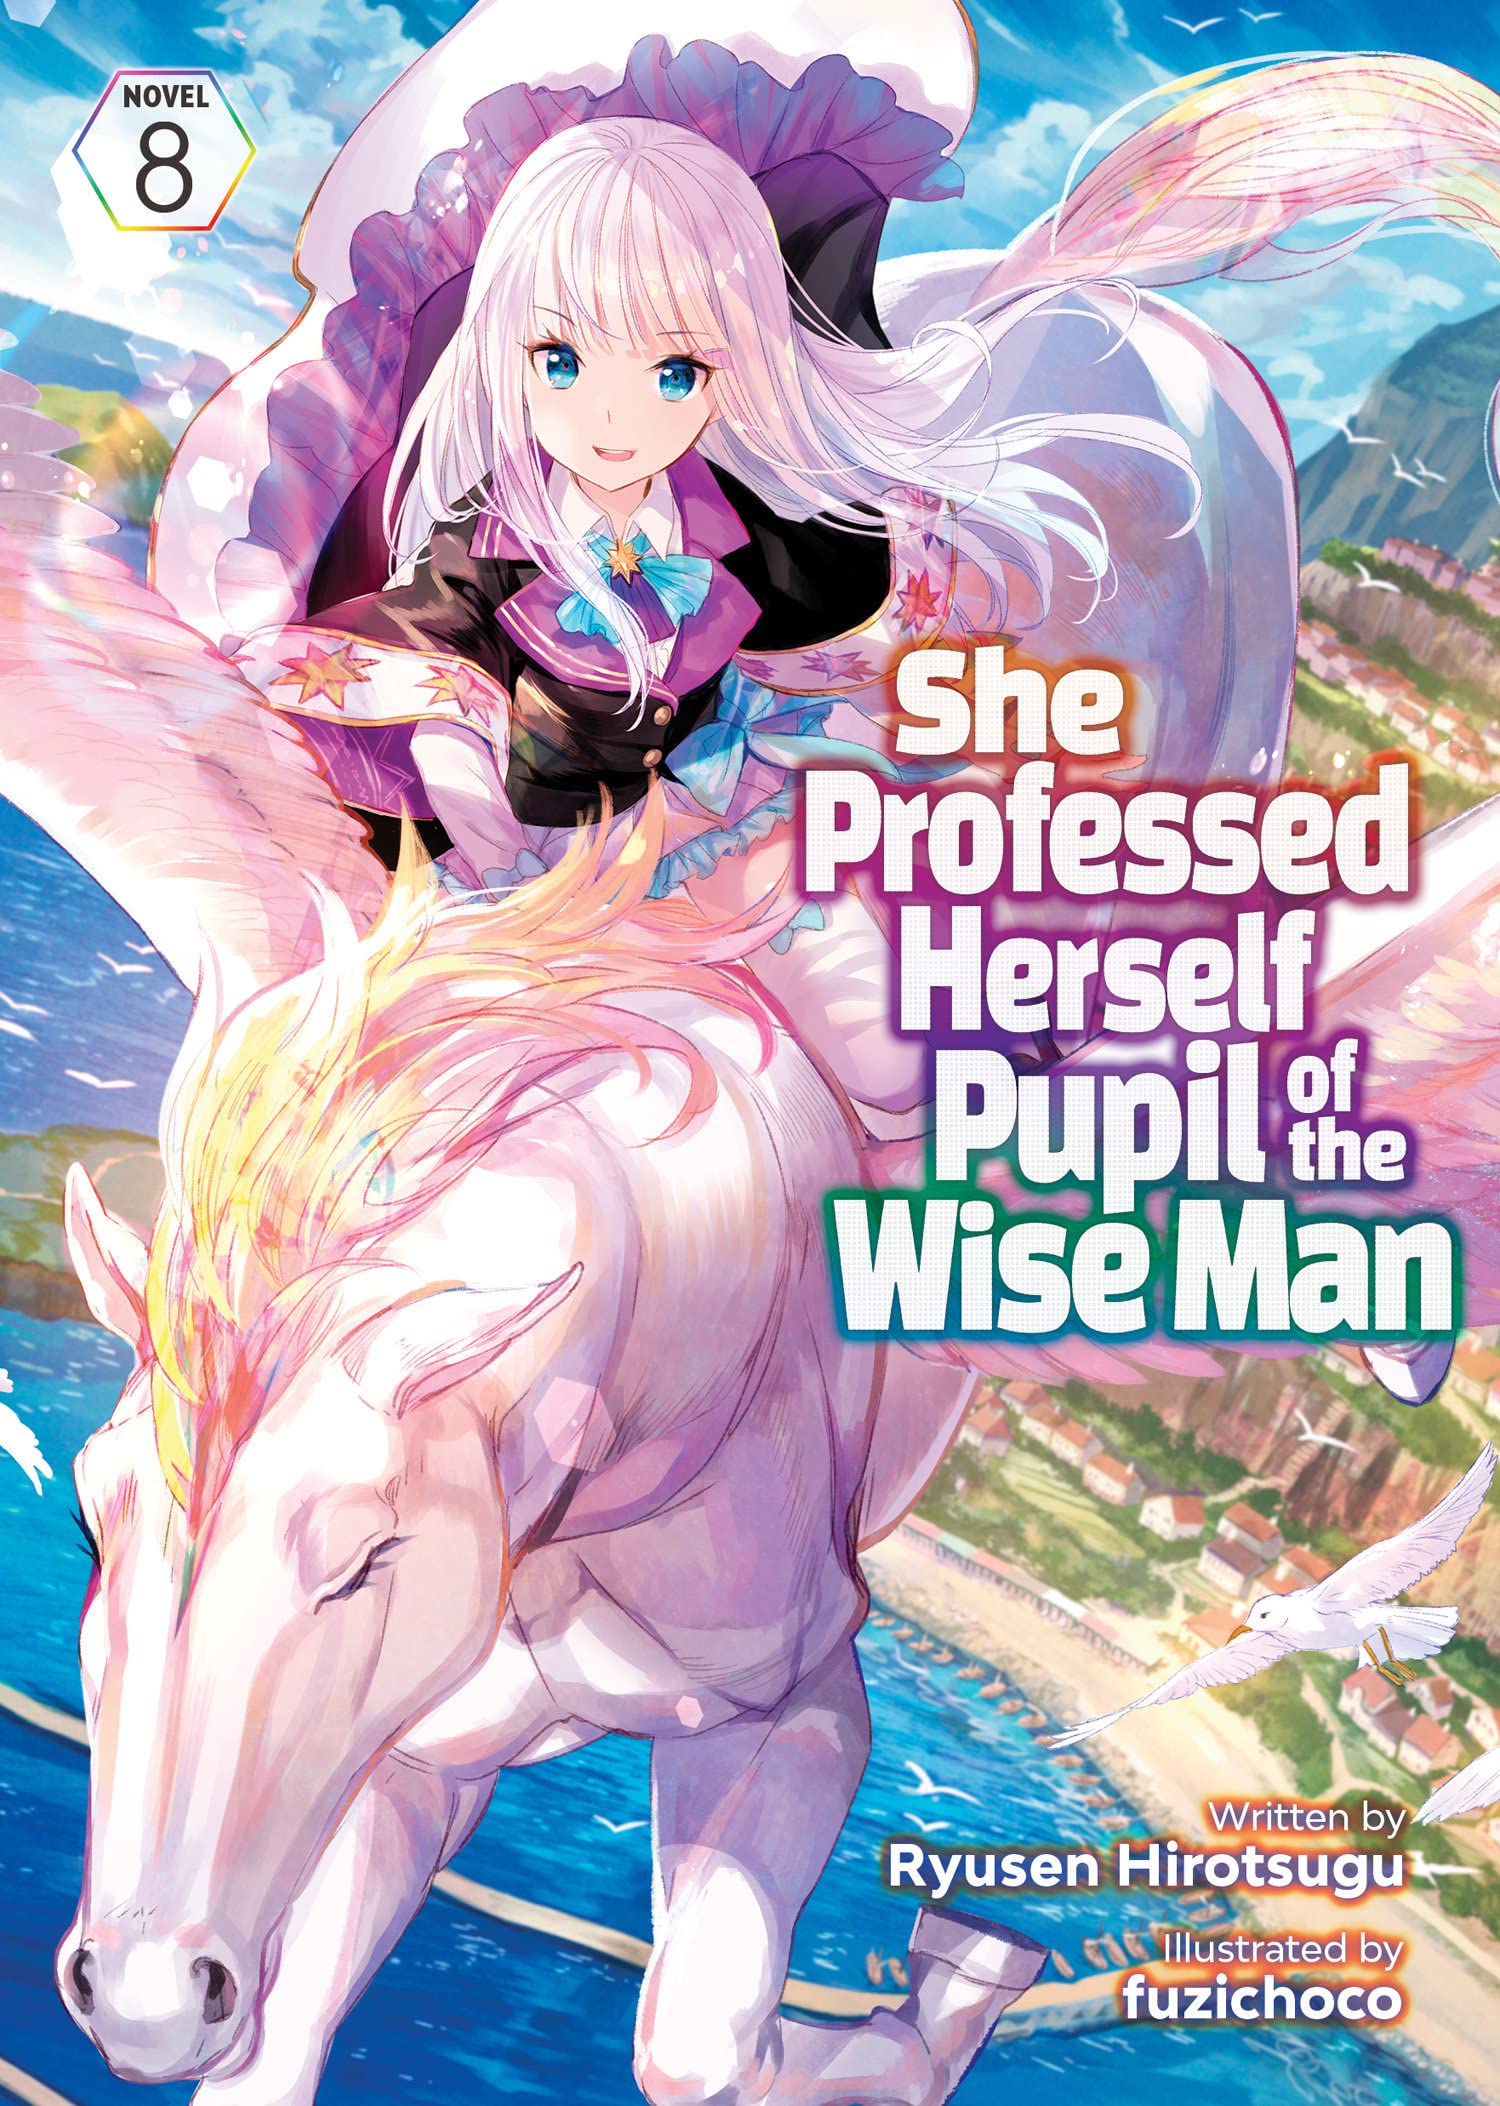 She Professed Herself Pupil of the Wise Man (Light Novel) Vol. 08